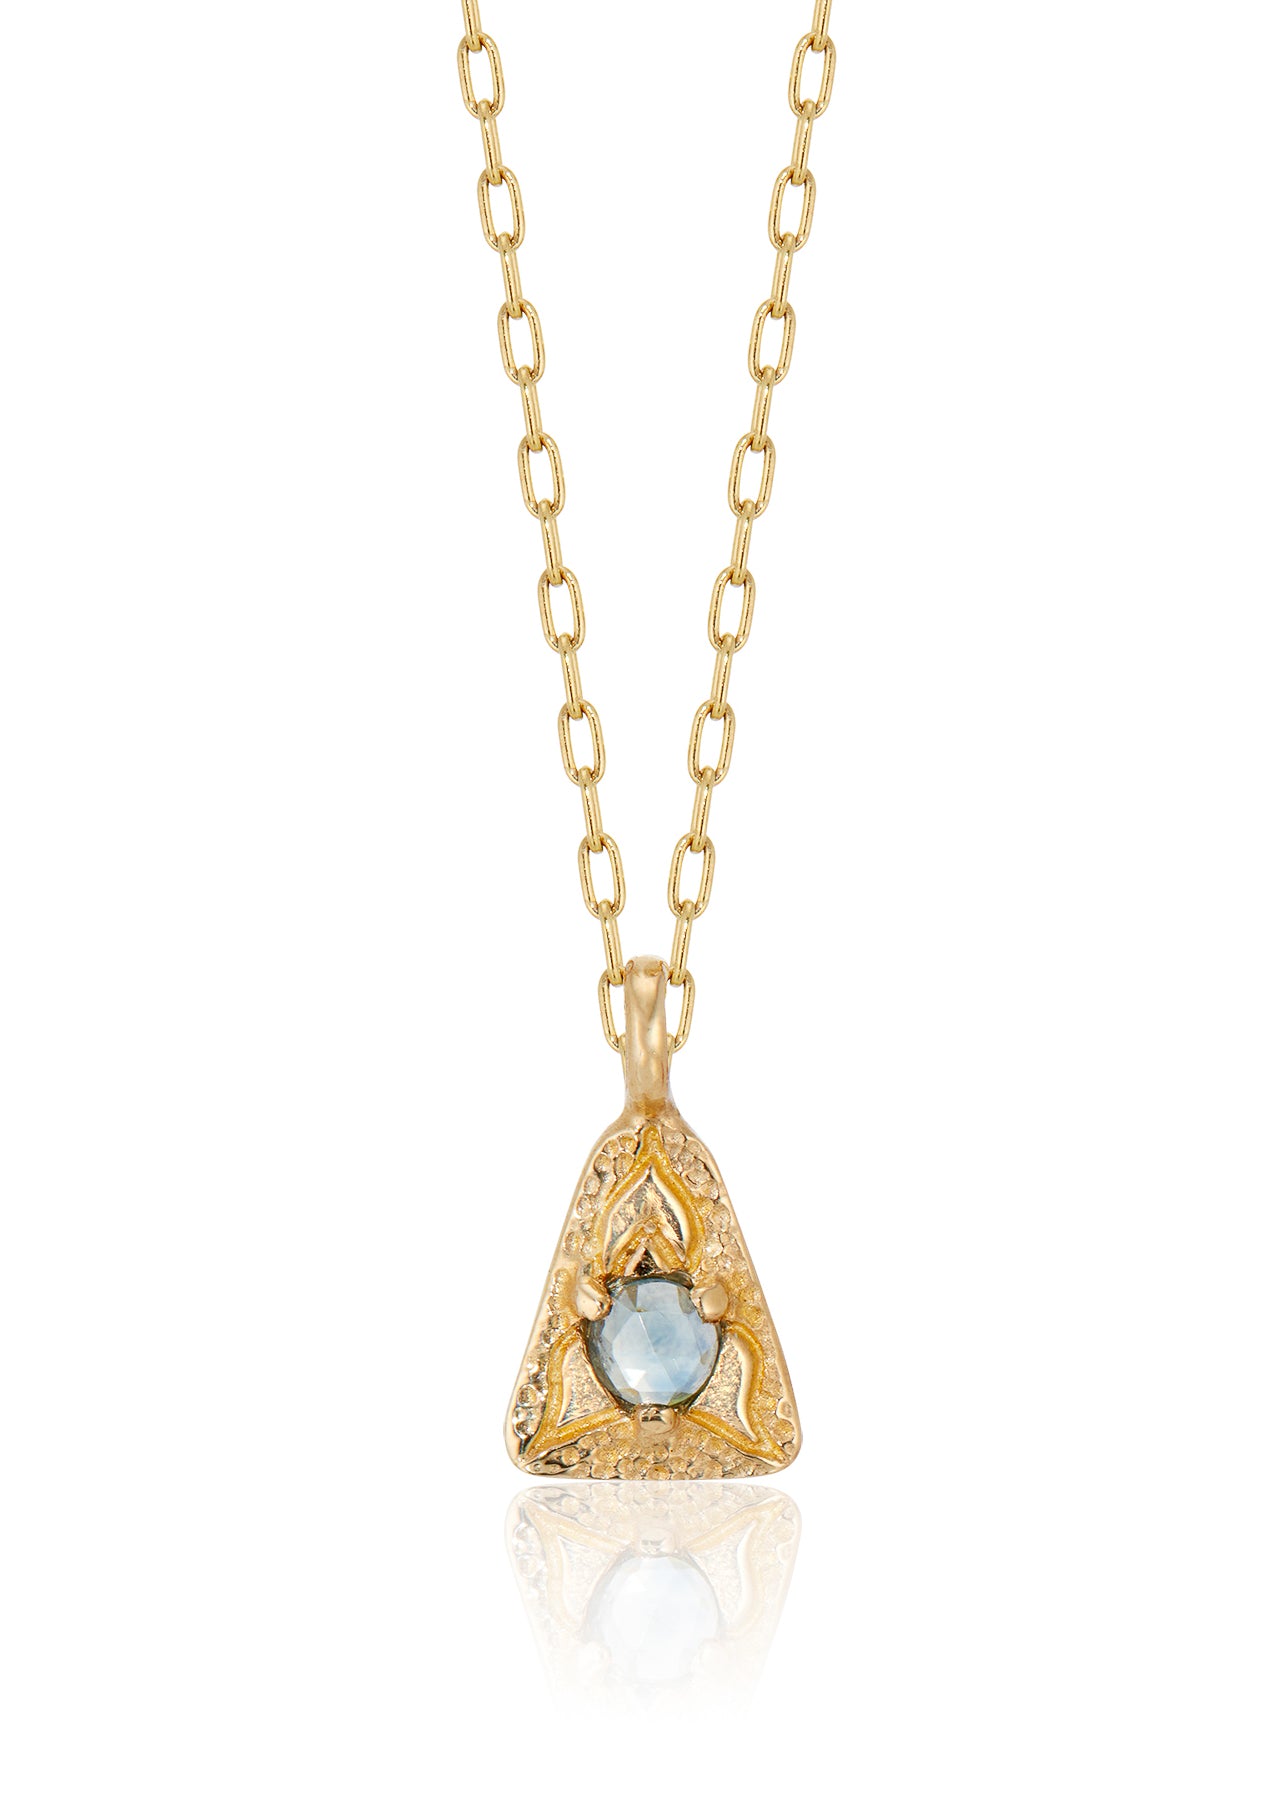 A celebration of resilience and strength. In nature, this water flower rises from the mud each day and blooms to its full potential. In architecture, the triangle is one of the strongest structures. The Blue Lotus necklace merges the natural elements of a rose cut blue sapphire and hand-carved gold lotus petals with an architecturally-inspired triangular pendant for a necklace of beauty and balance. 